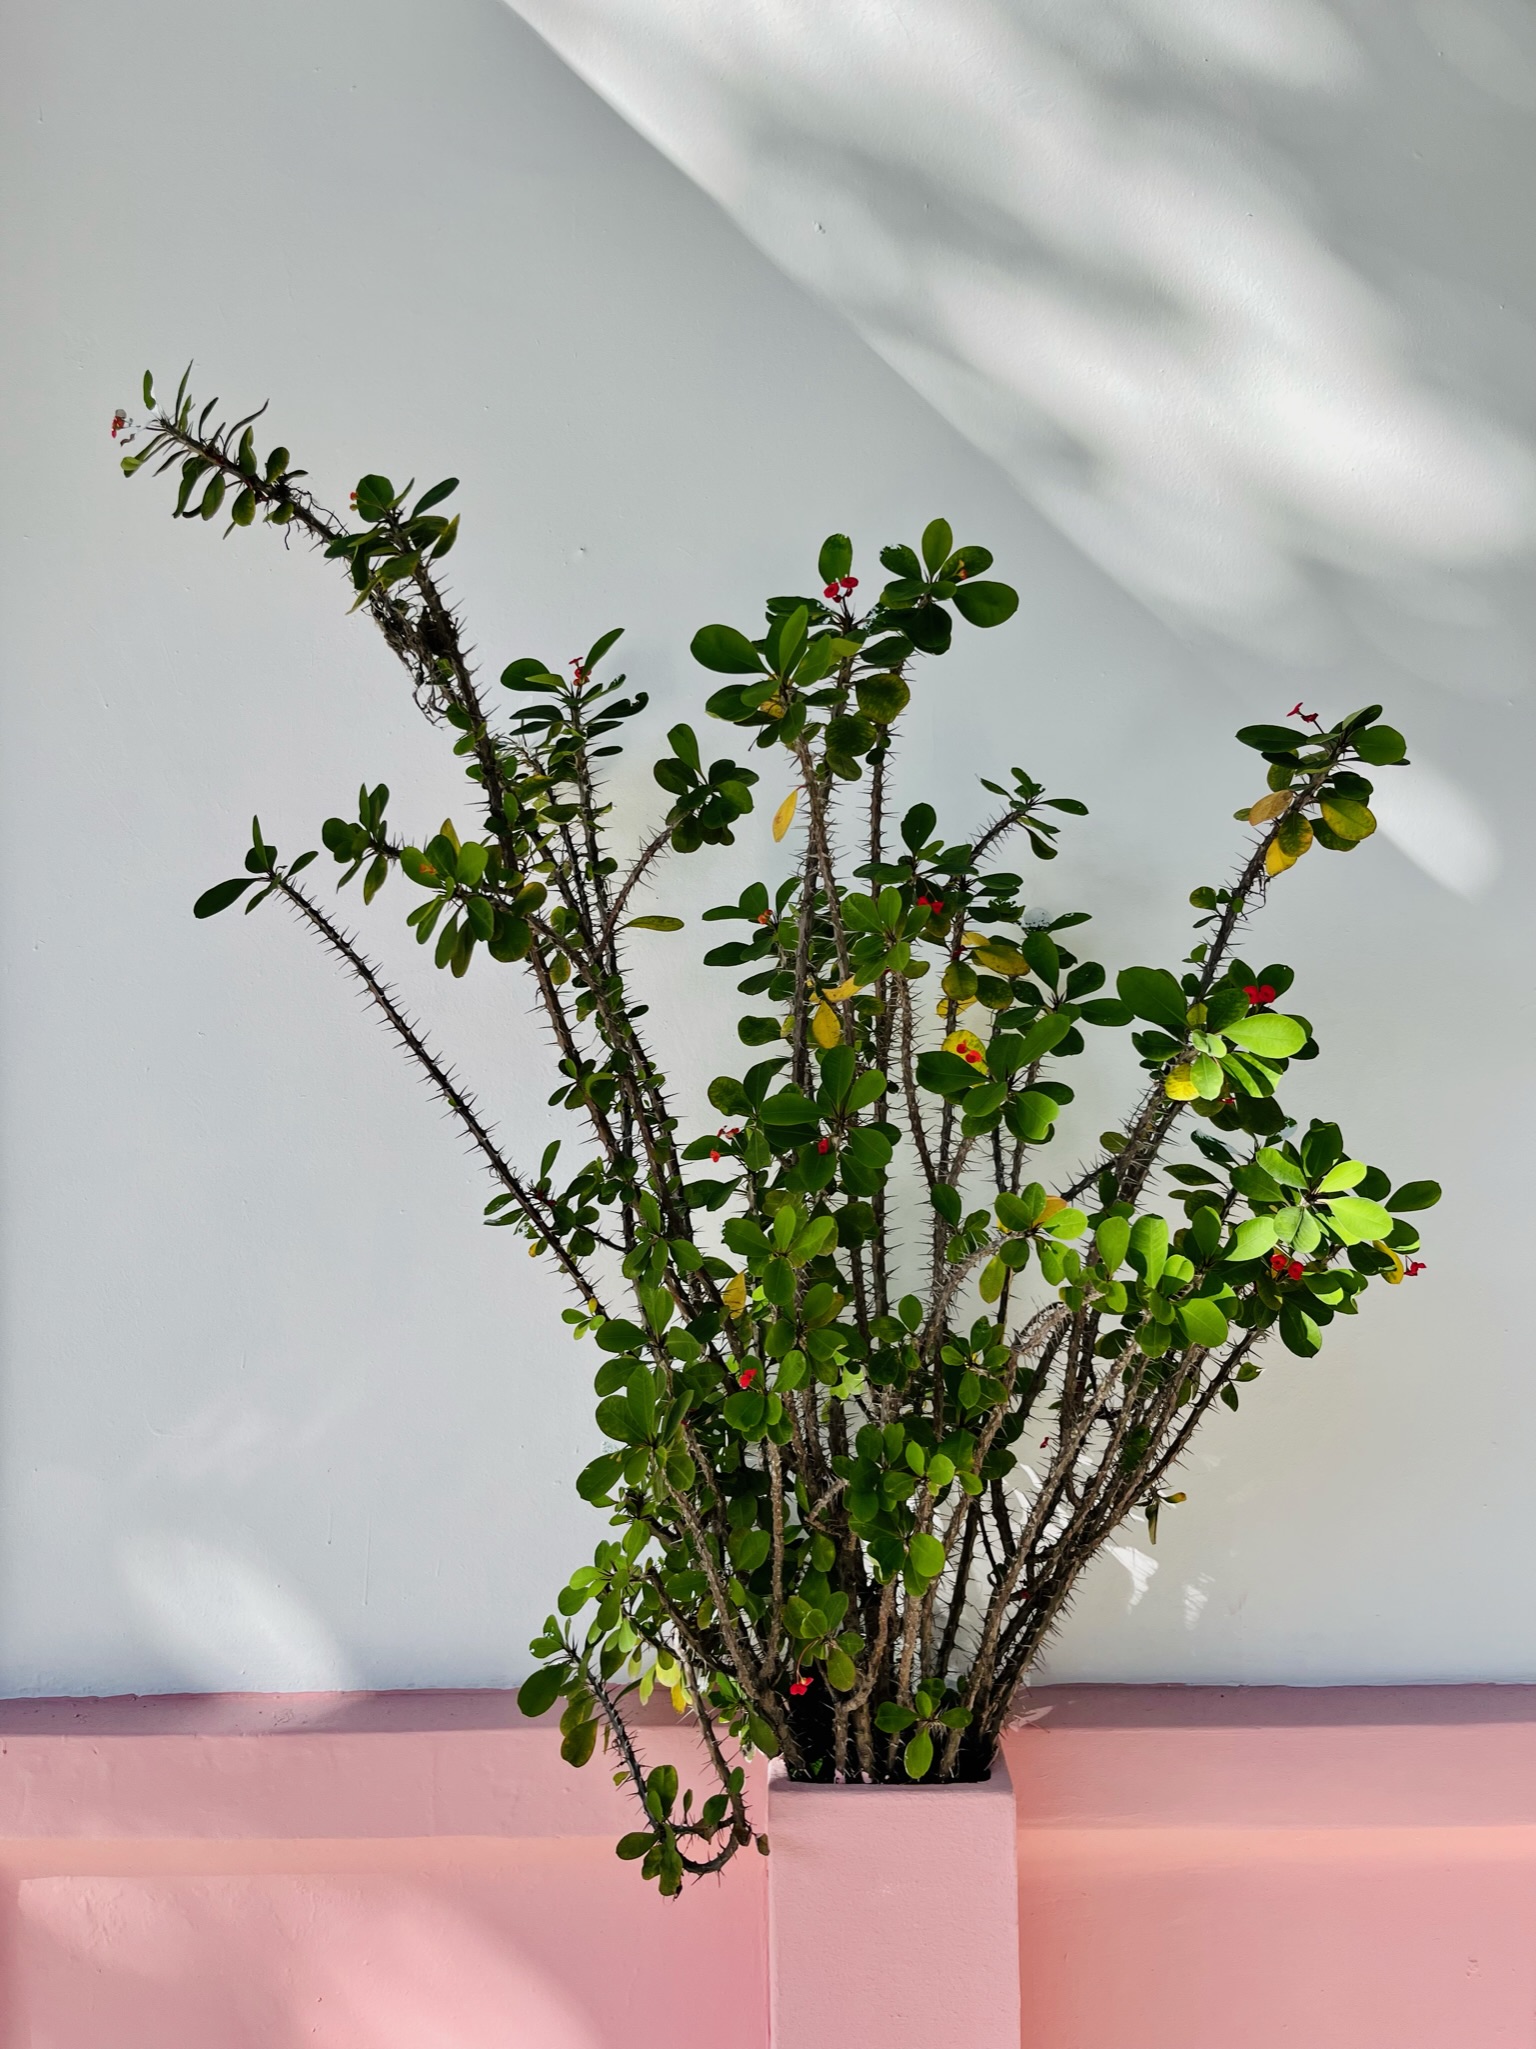 Thorny plant with bright green leaves in a pink pot and dappled light